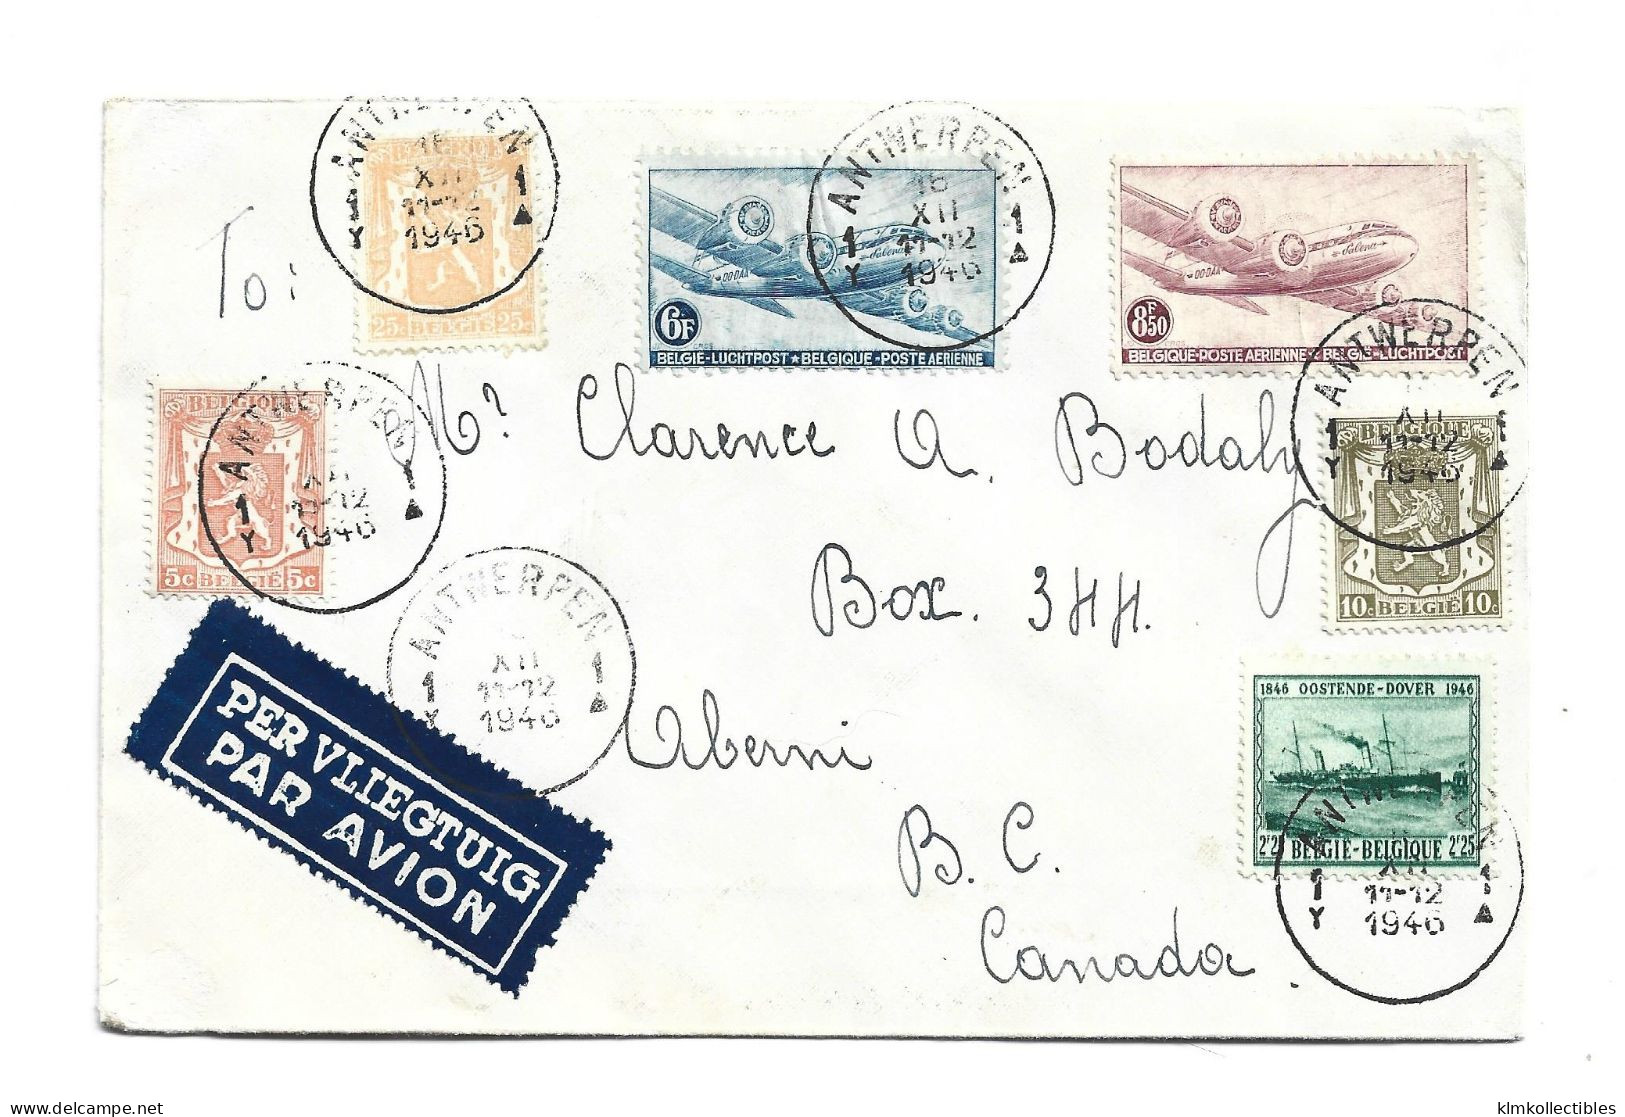 DENMARK DANMARK - 1946 AIRMAIL LUFTPOST COVER TO CANADA - Airmail